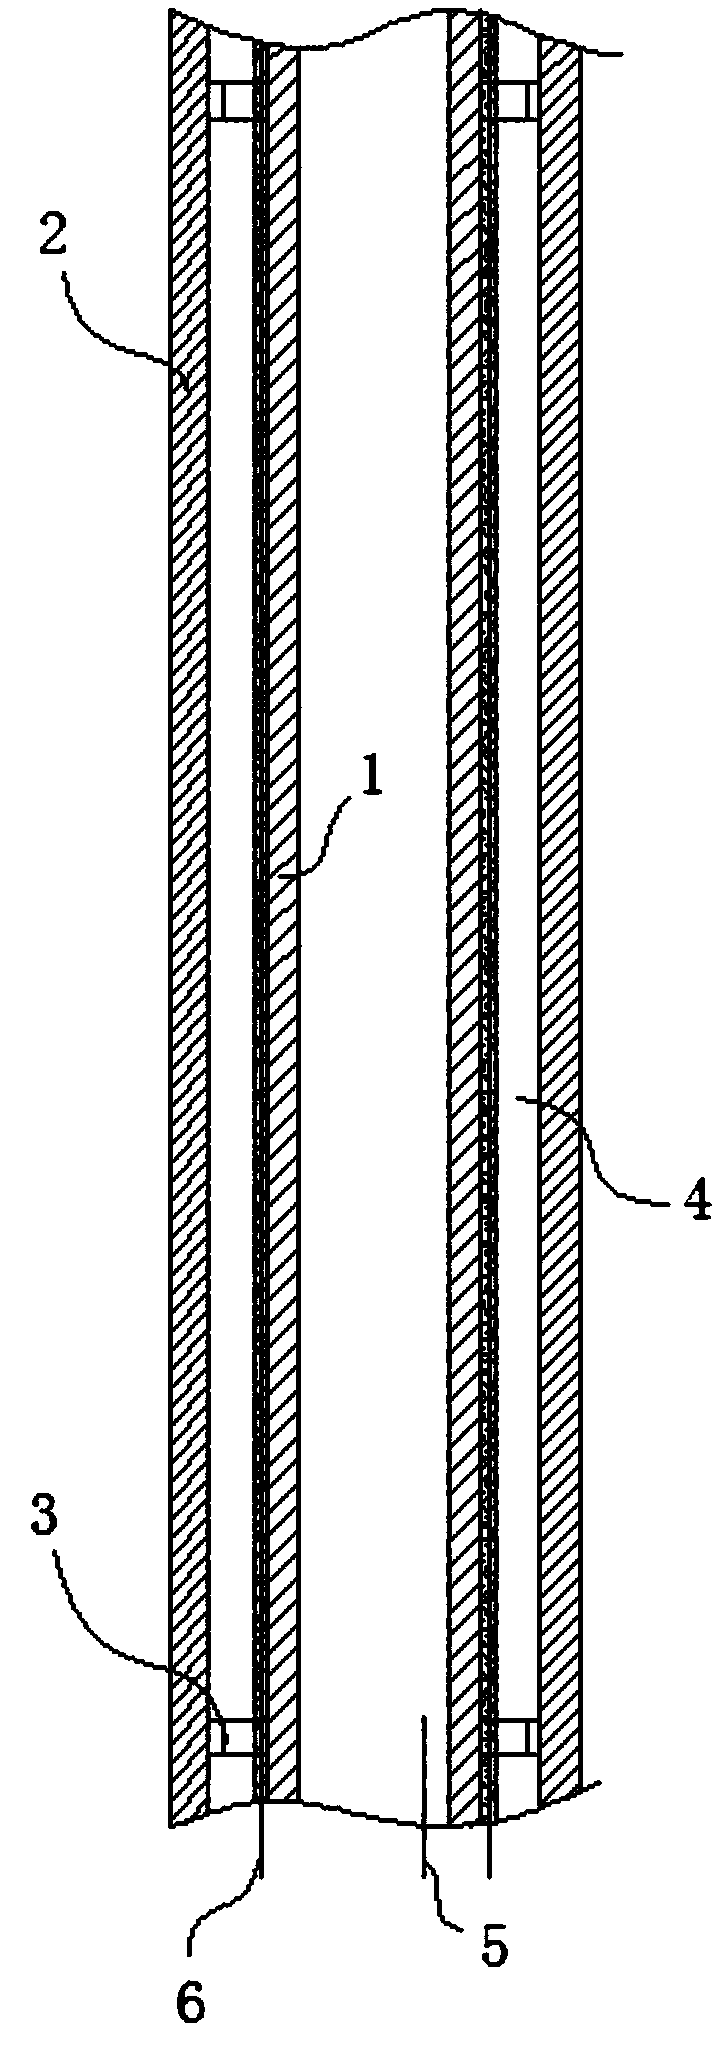 Pipe structure with automatic leakage point detection prompt function